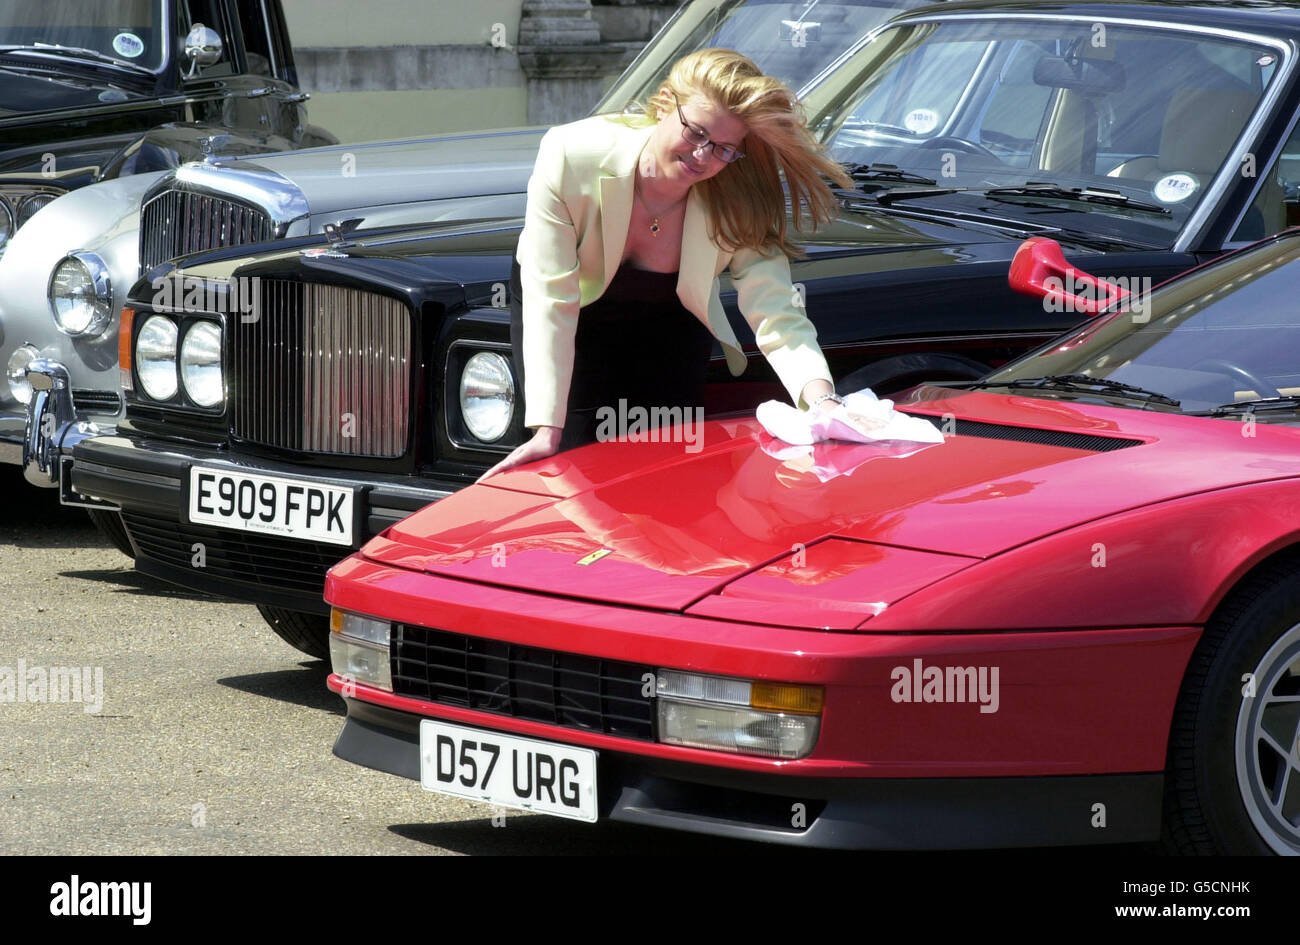 Christie's employee Cynthia Paris polishes the bonnet of rock star Elton John's 1987 Ferrari Testarossa sports car, ahead of an auction of 20 cars from his collection at Christie's, in London, on 05/06/01. Stock Photo